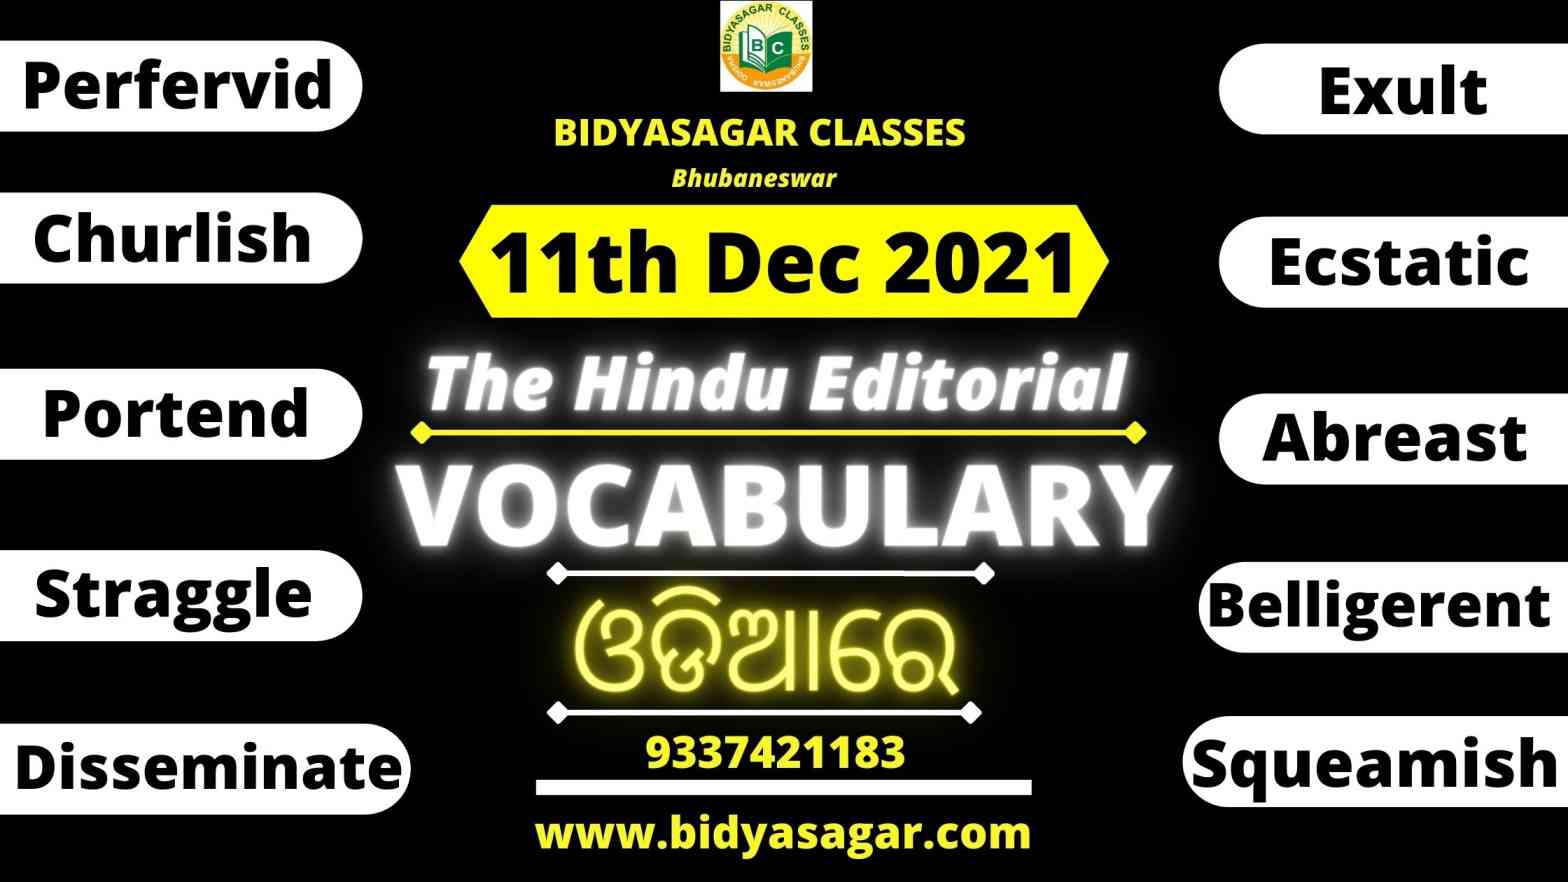 The Hindu Editorial Vocabulary of 11th December 2021